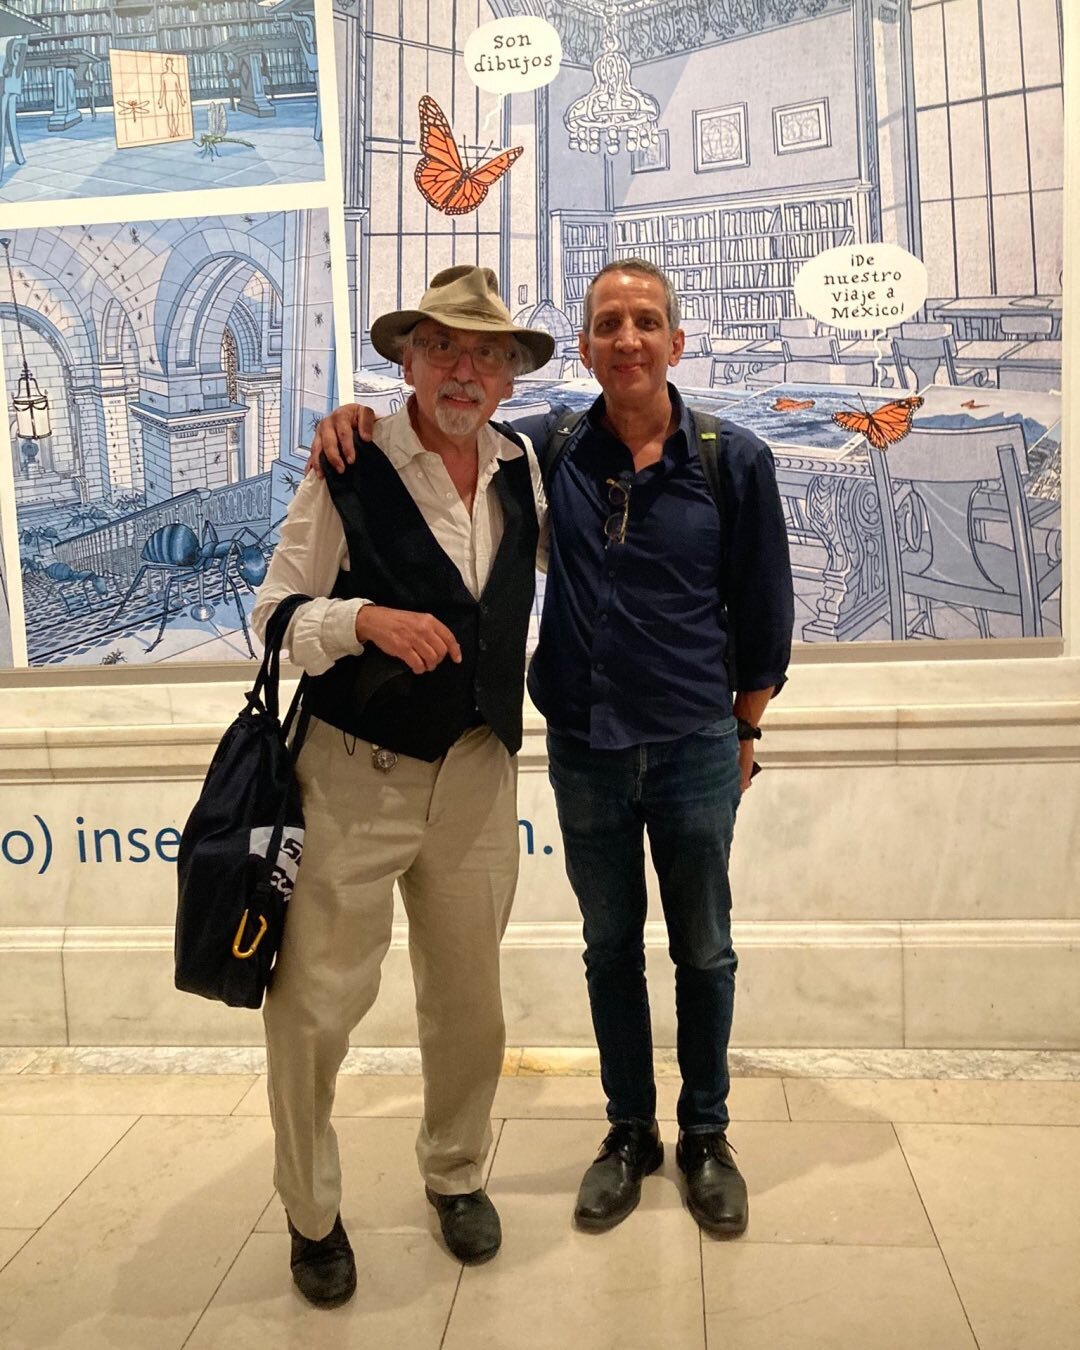 Today at my exhibition with Art Spiegelman. (closing August 13)

https://www.nypl.org/events/tours/audio-guides/intersects/intro